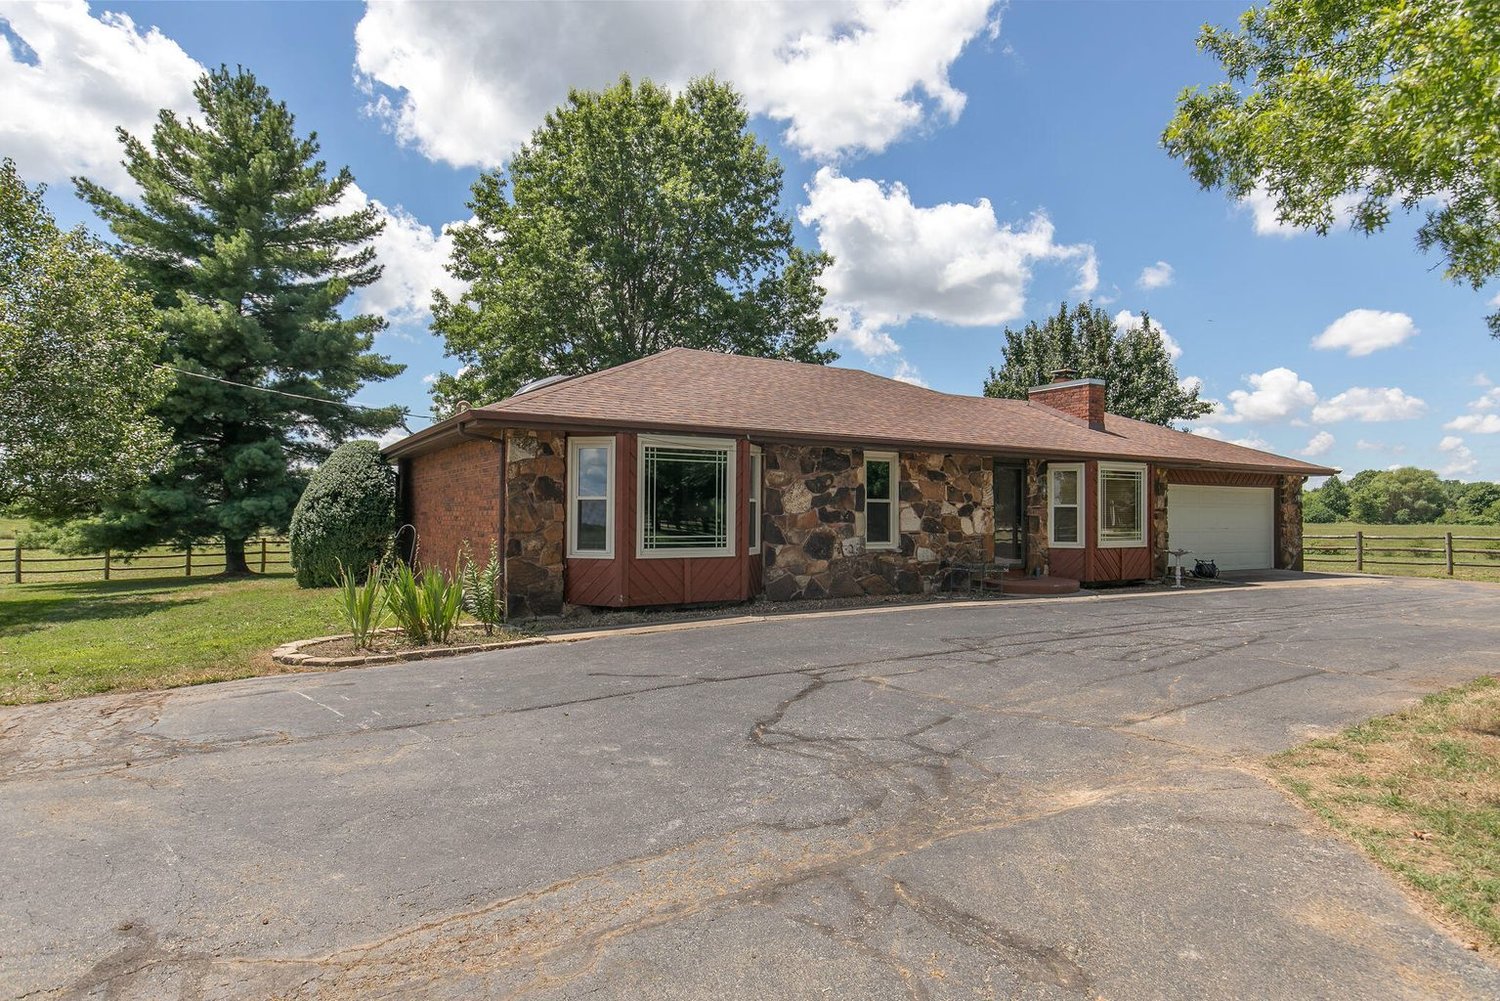 6210 E. Farm Road 132
$500,000
Bedrooms: 2
Bathrooms: 2
Listing firm: Keller Williams Greater Springfield